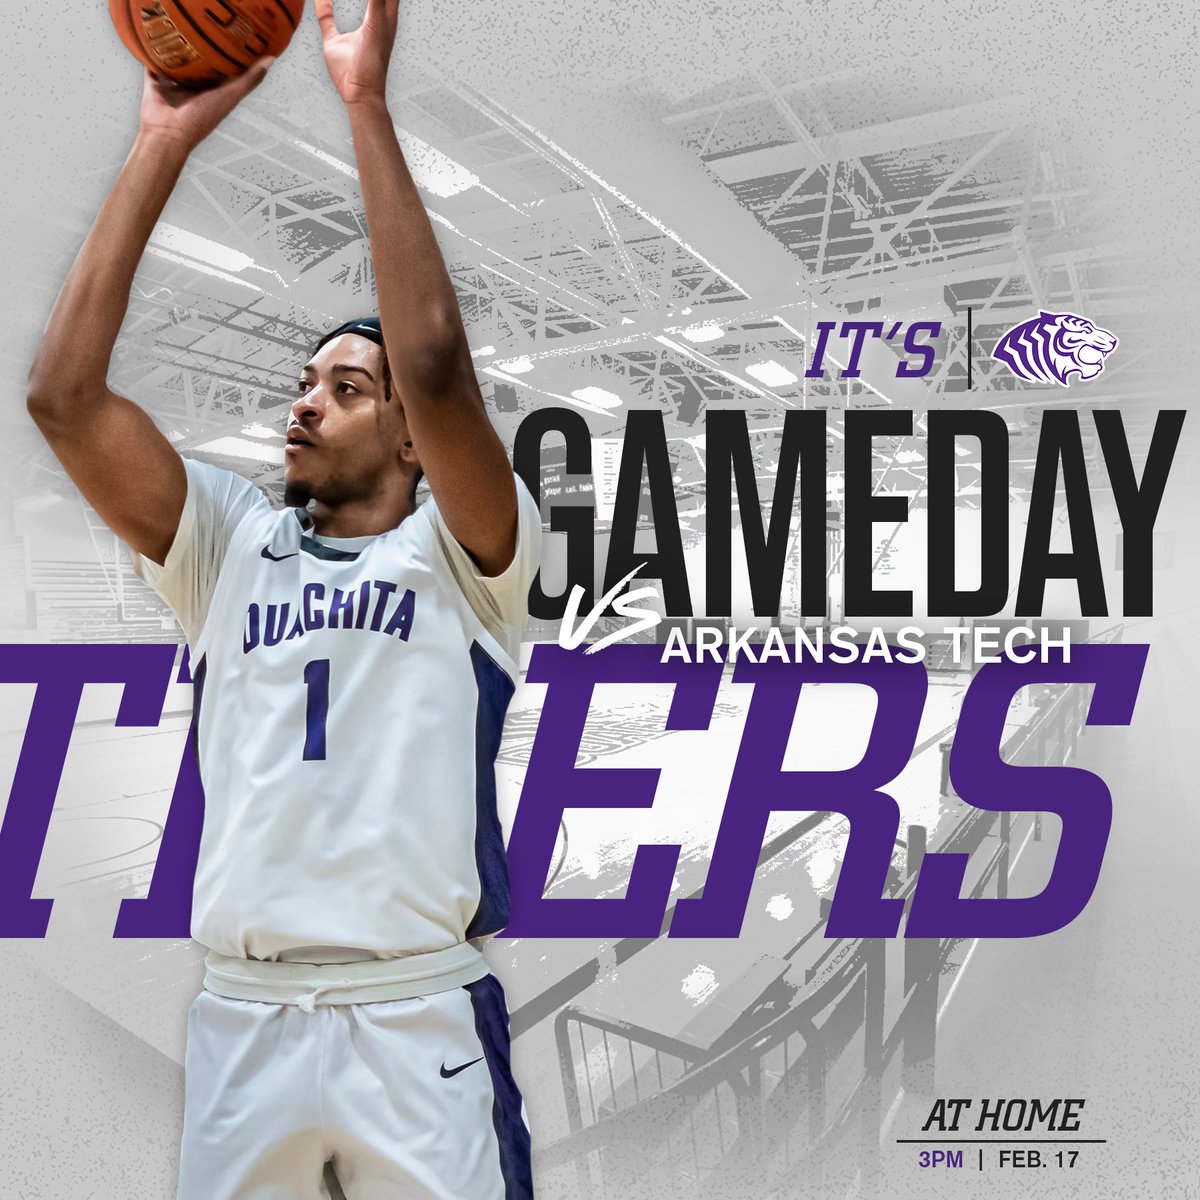 Tiger Nation, it's GAMEDAY! The Tigers take on the Wonder Boys at Bill Vining Arena! Follow along at obutigers.com/coverage #tigerfamily🐅 #BringYourRoar